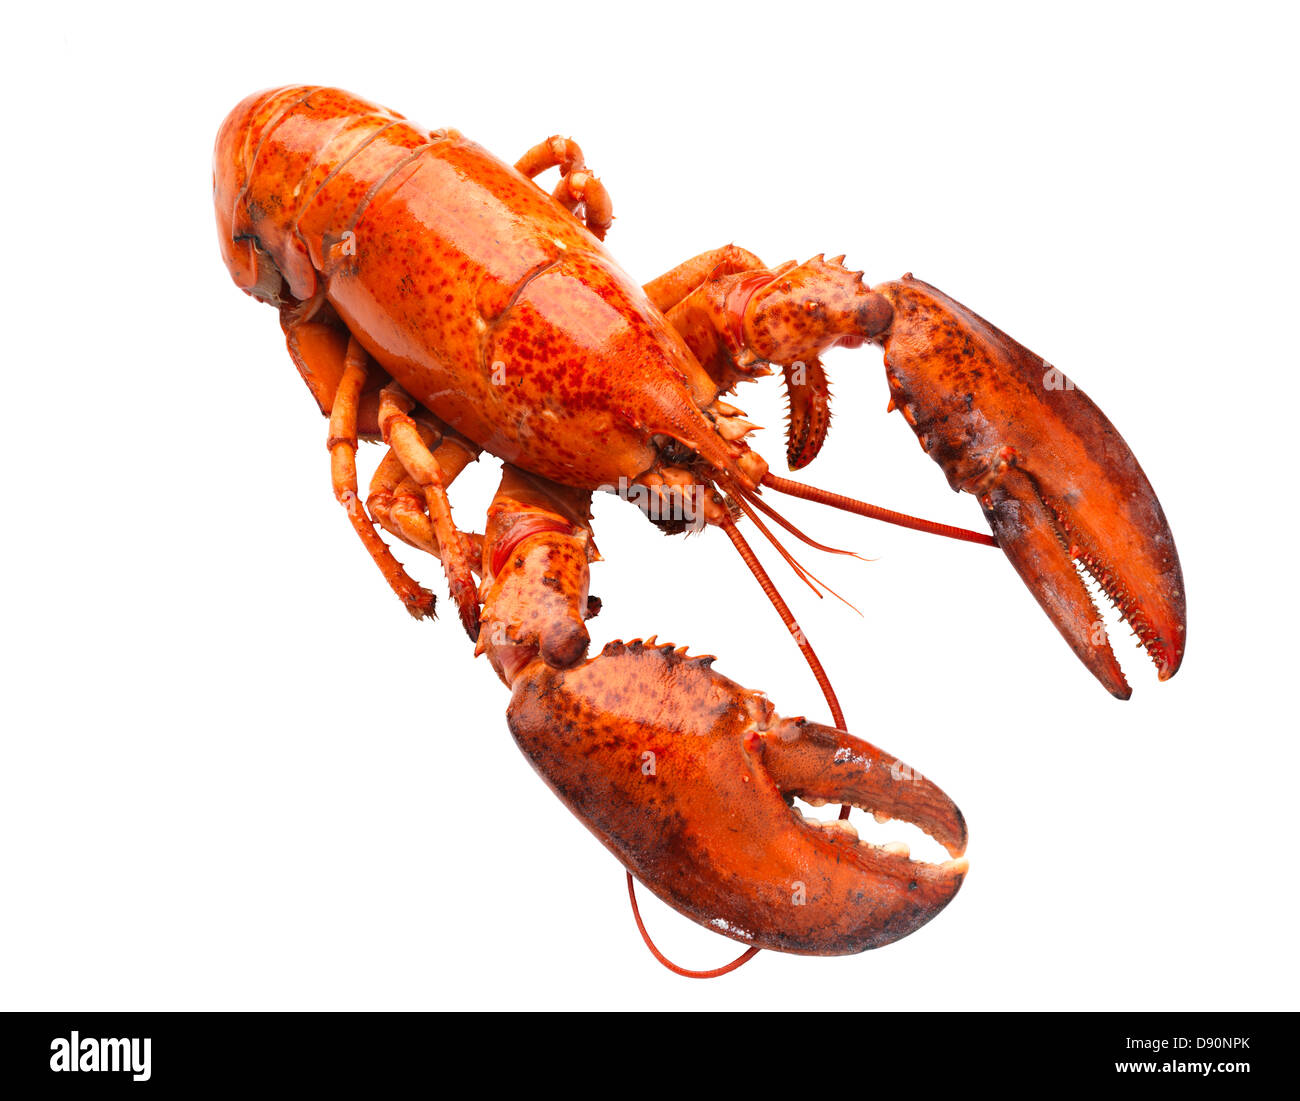 Lobster on white background Stock Photo